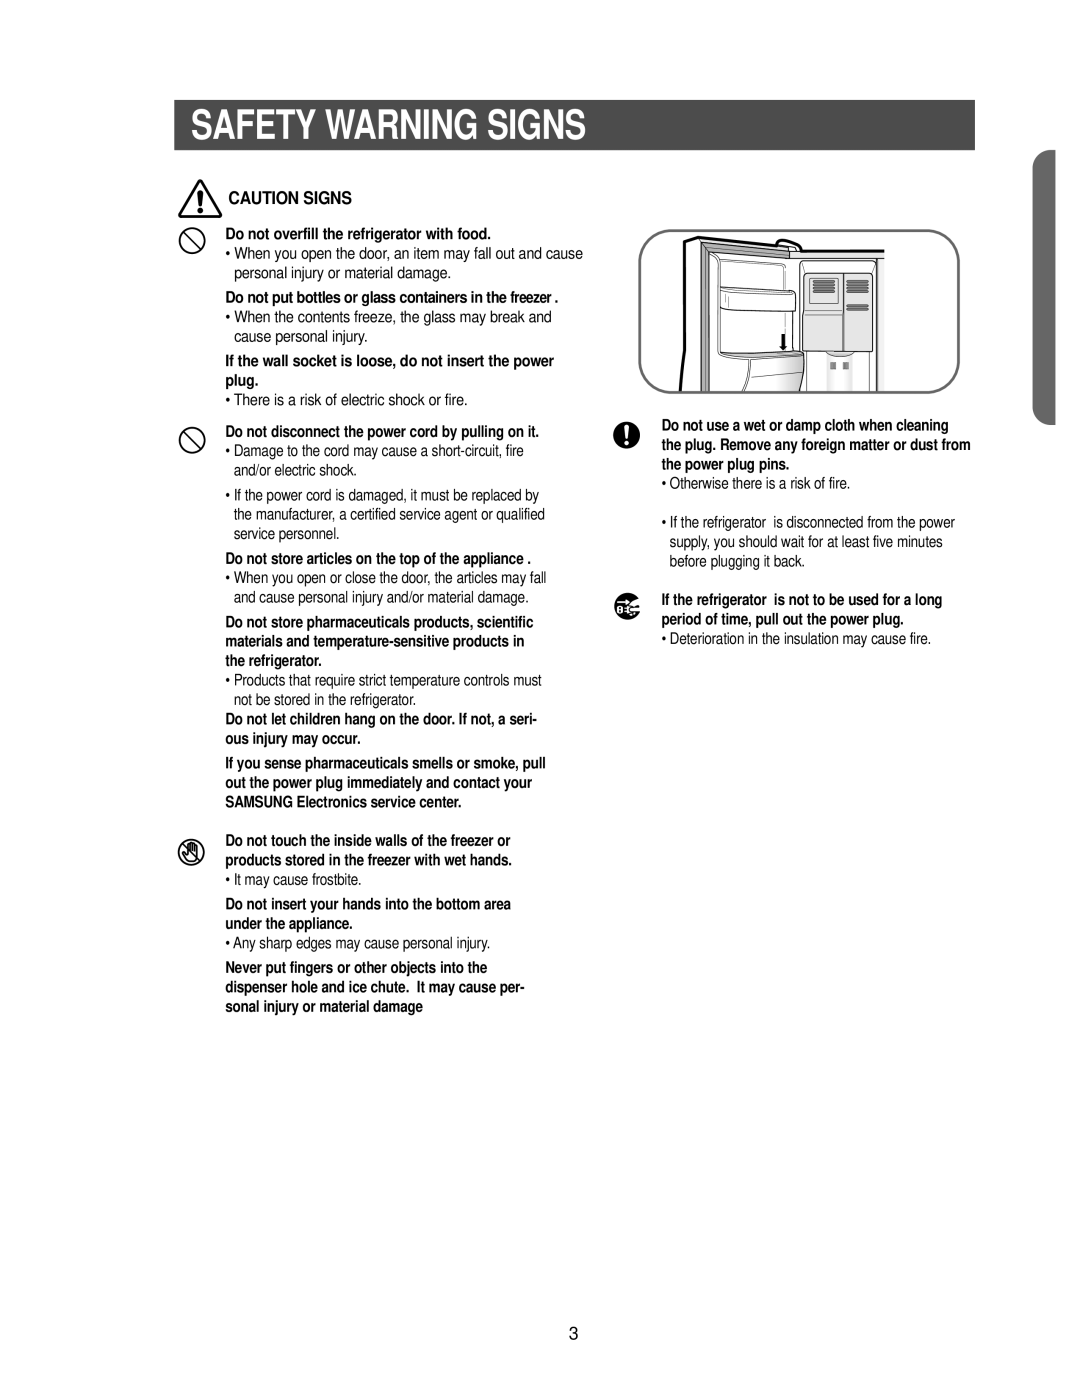 Samsung RS2533SW Safety Warning Signs, Caution Signs, Do not overfill the refrigerator with food, It may cause frostbite 